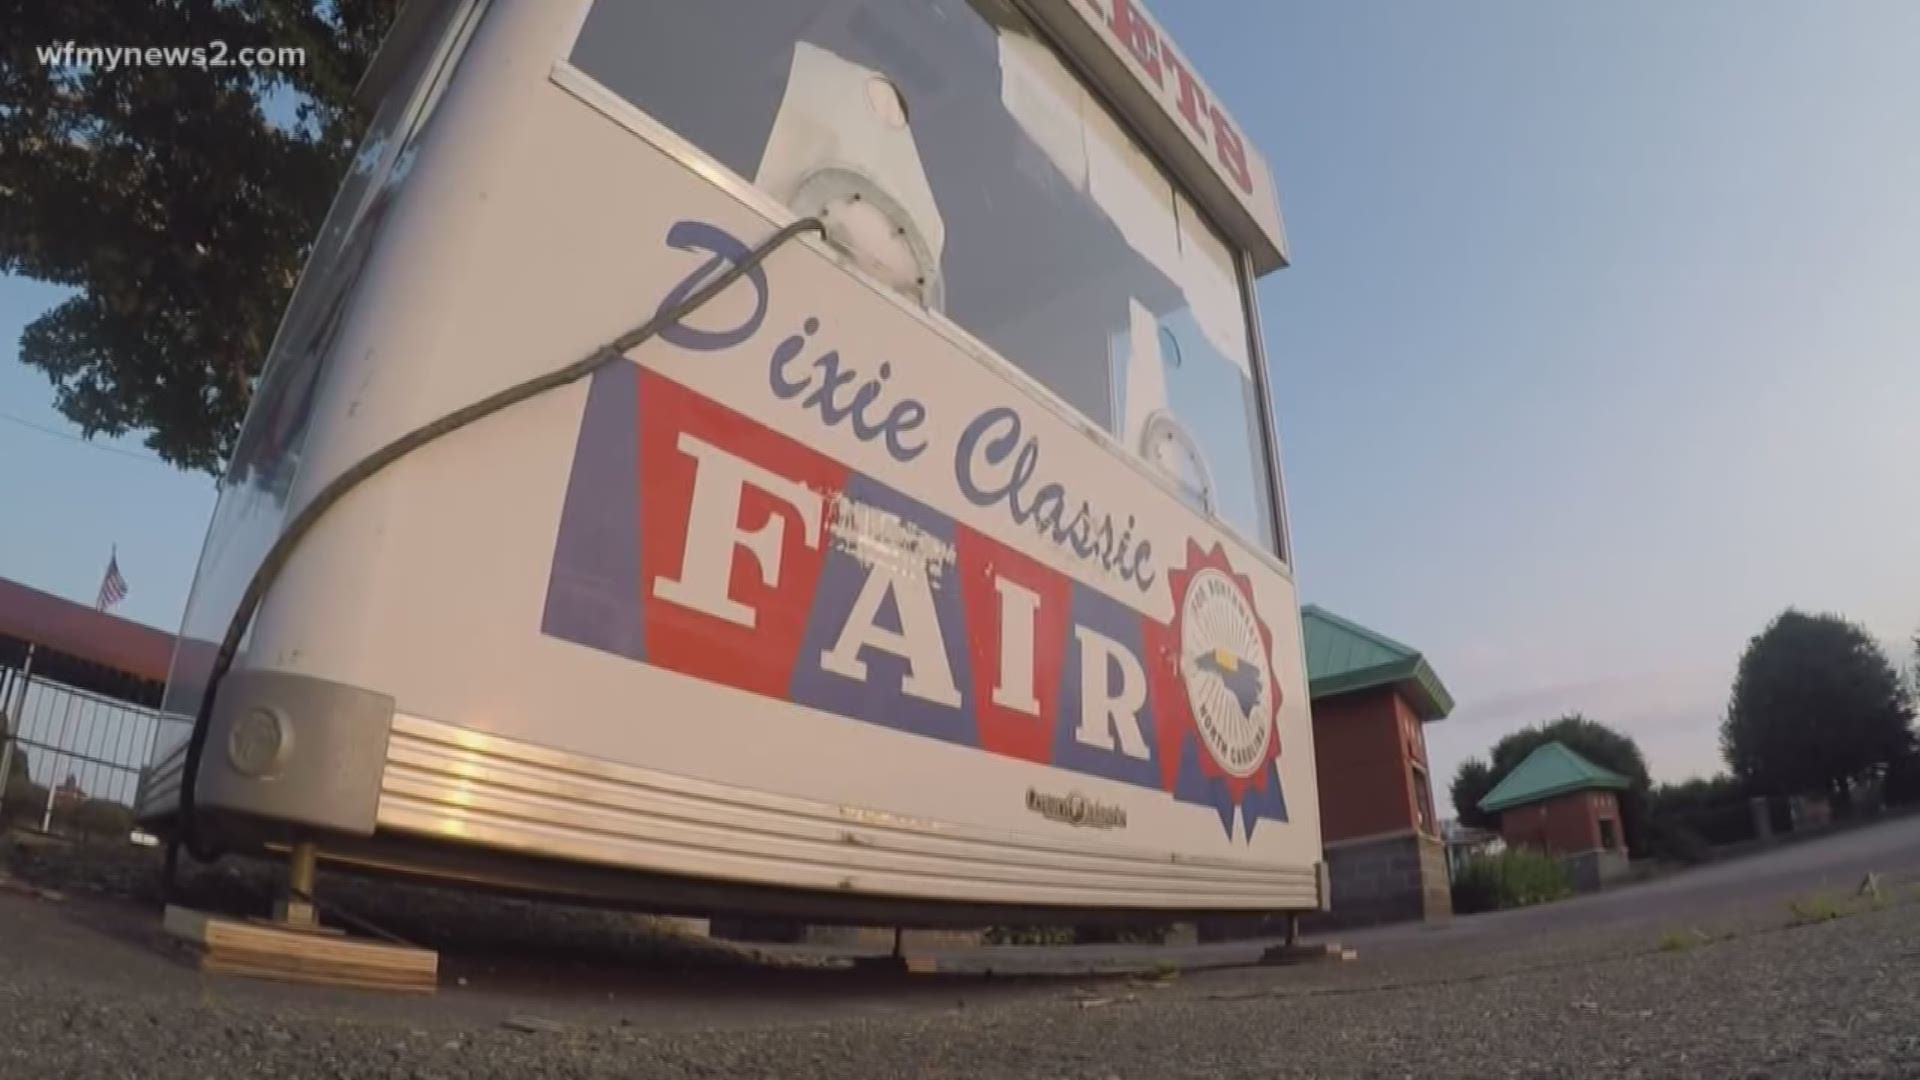 The full Winston-Salem city council voted 6 to 2 to change the name to Carolina Classic Fair over the other option Piedmont Classic Fair.